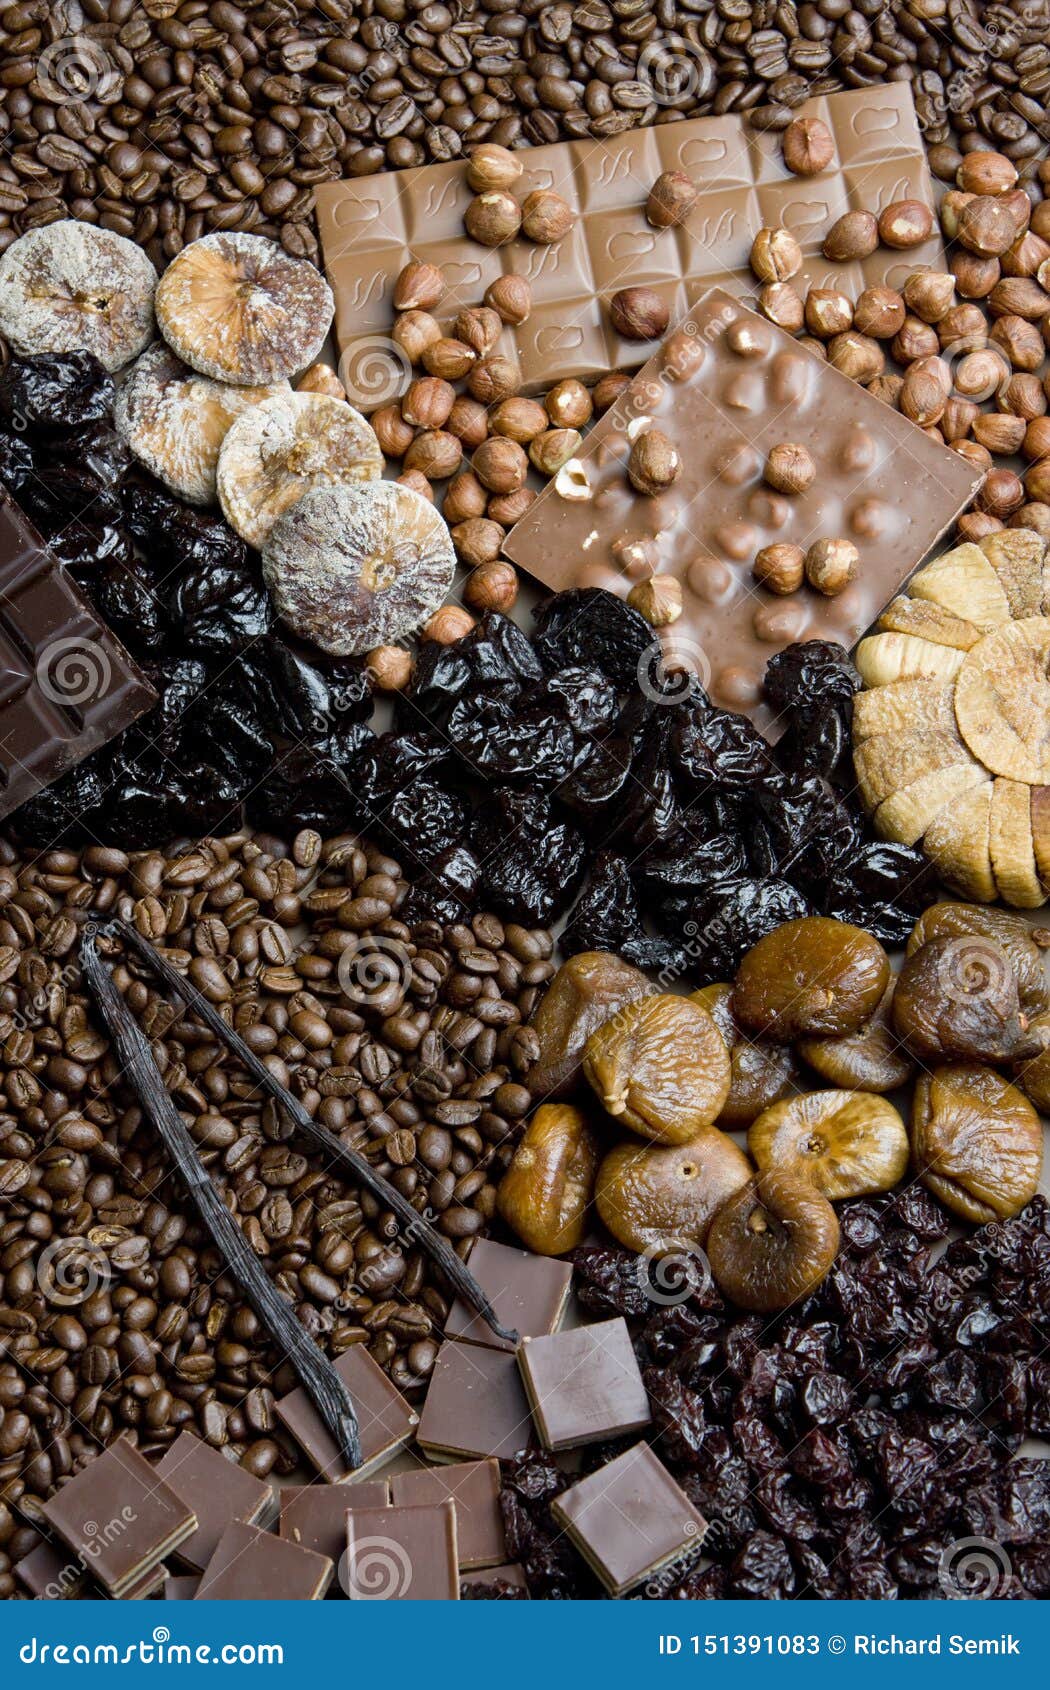 dried fruit with chocolate and coffee beans